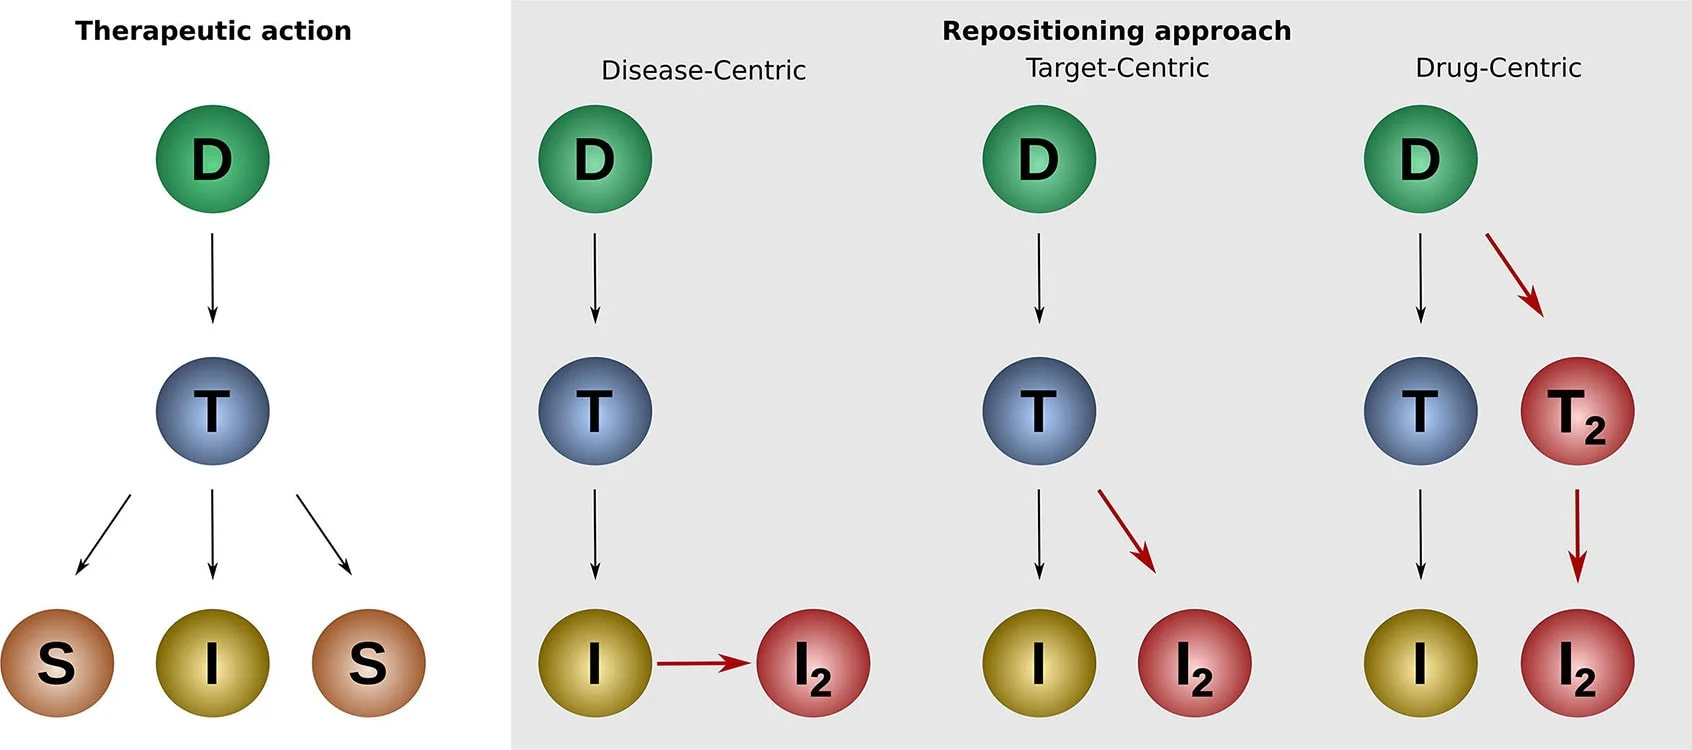 Comparison of the three repositioning approaches